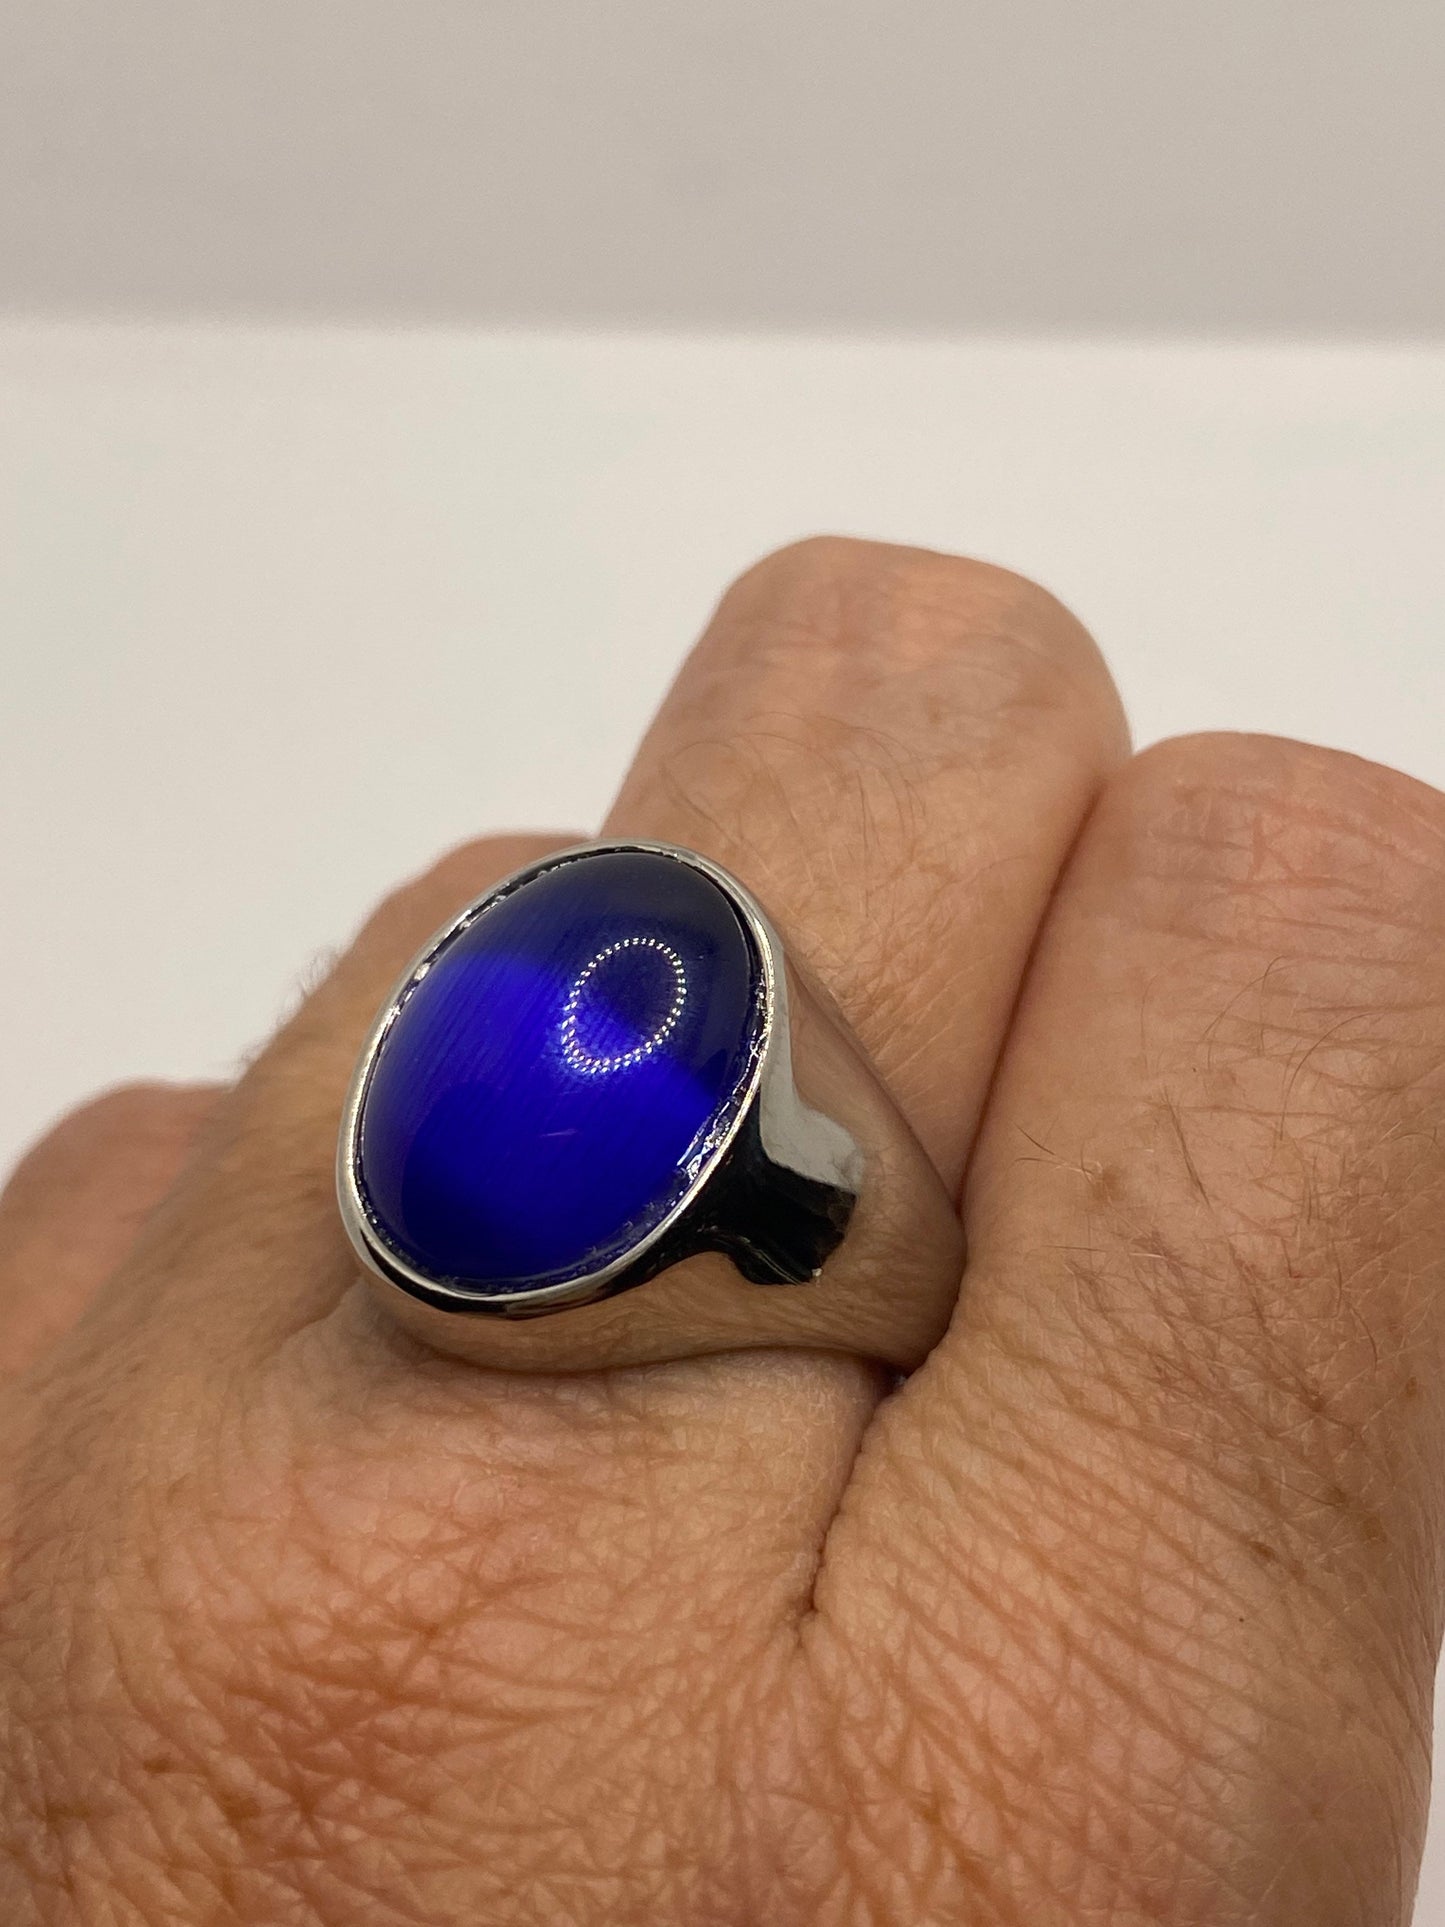 Vintage Blue Cats Eye Glass Mens Ring Stainless Steel